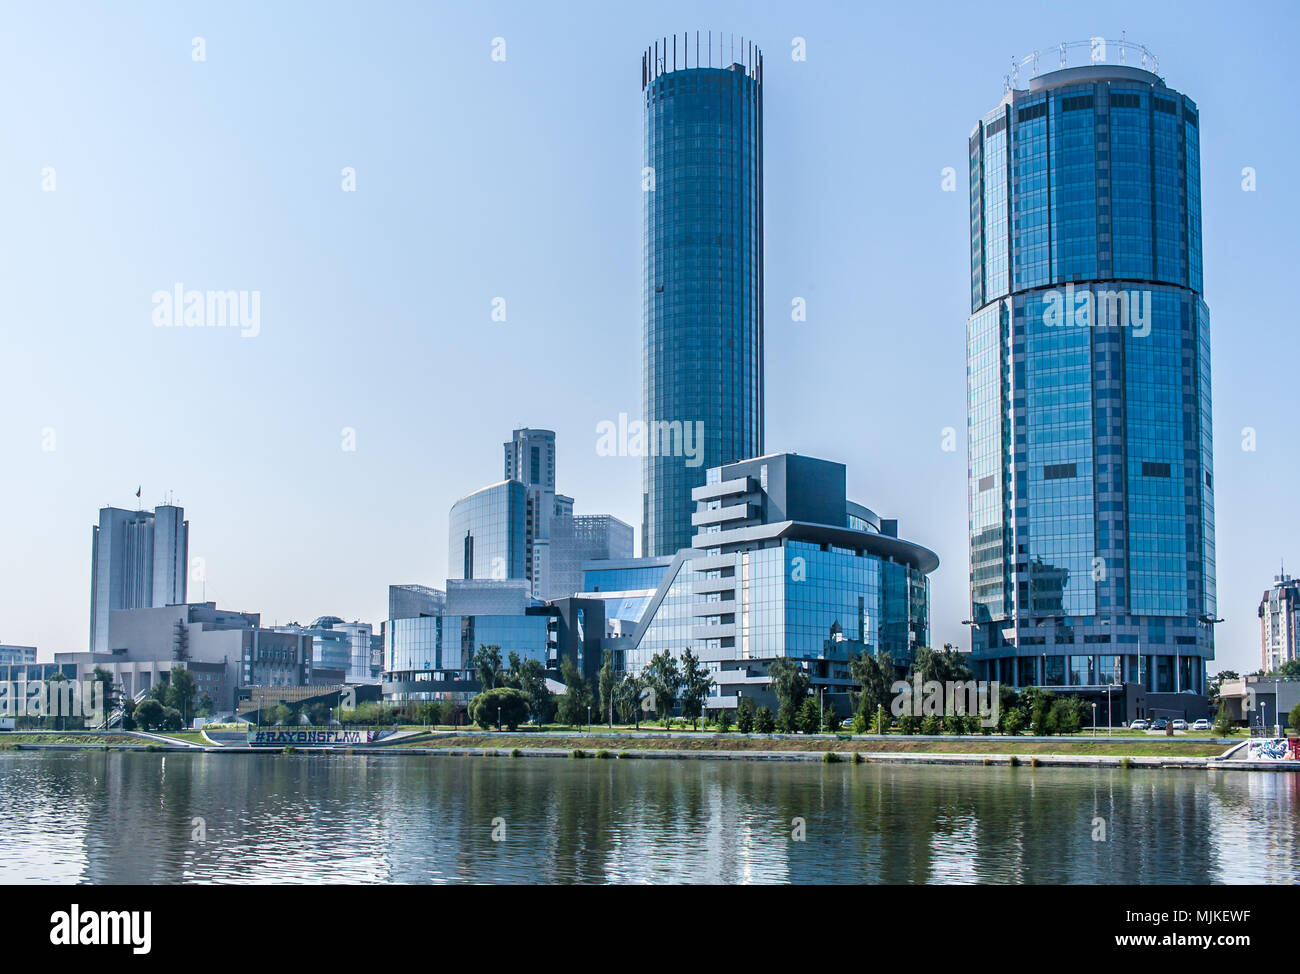 Yekaterinburg, Russia - August, 04,2016: View of Ekaterinburg city with skyscrapers, drama theatre and white house. Stock Photo